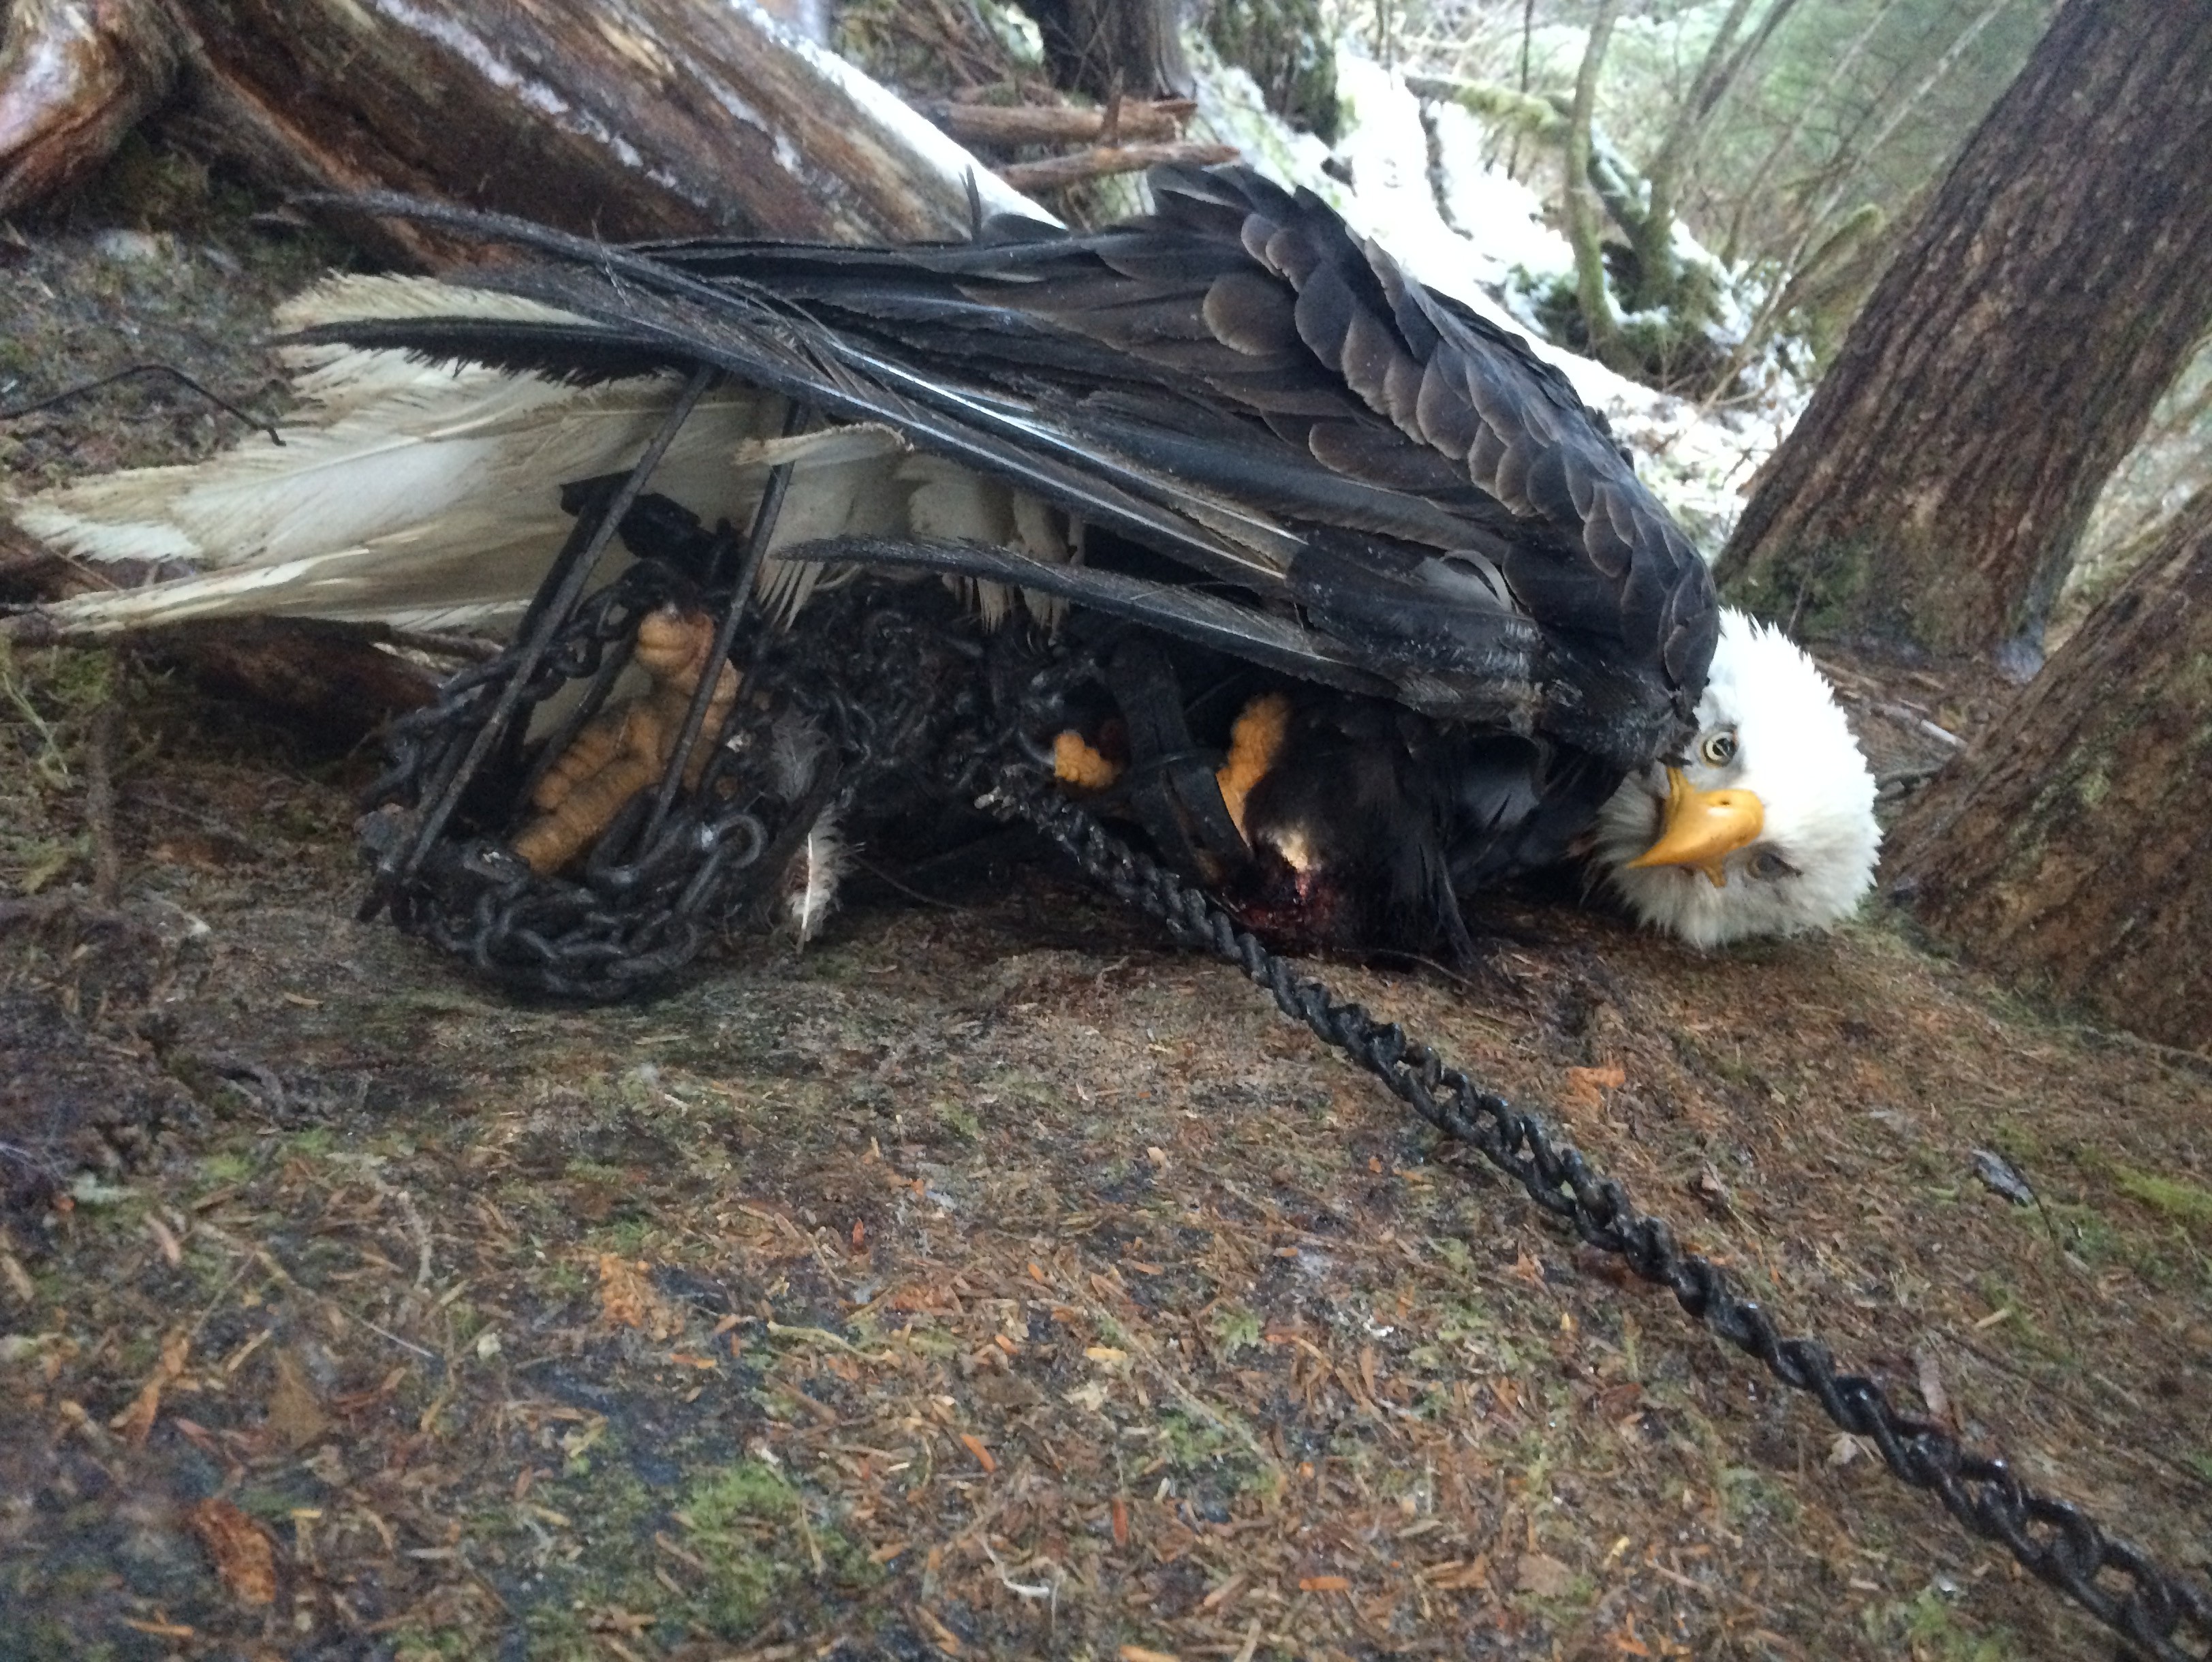 Kathleen Turley encountered this eagle stuck in two traps Dec. 24, 2014. She freed the eagle and tampered with other legally set traps in the area. She's now being sued. (Photo courtesy Kathleen Turley)